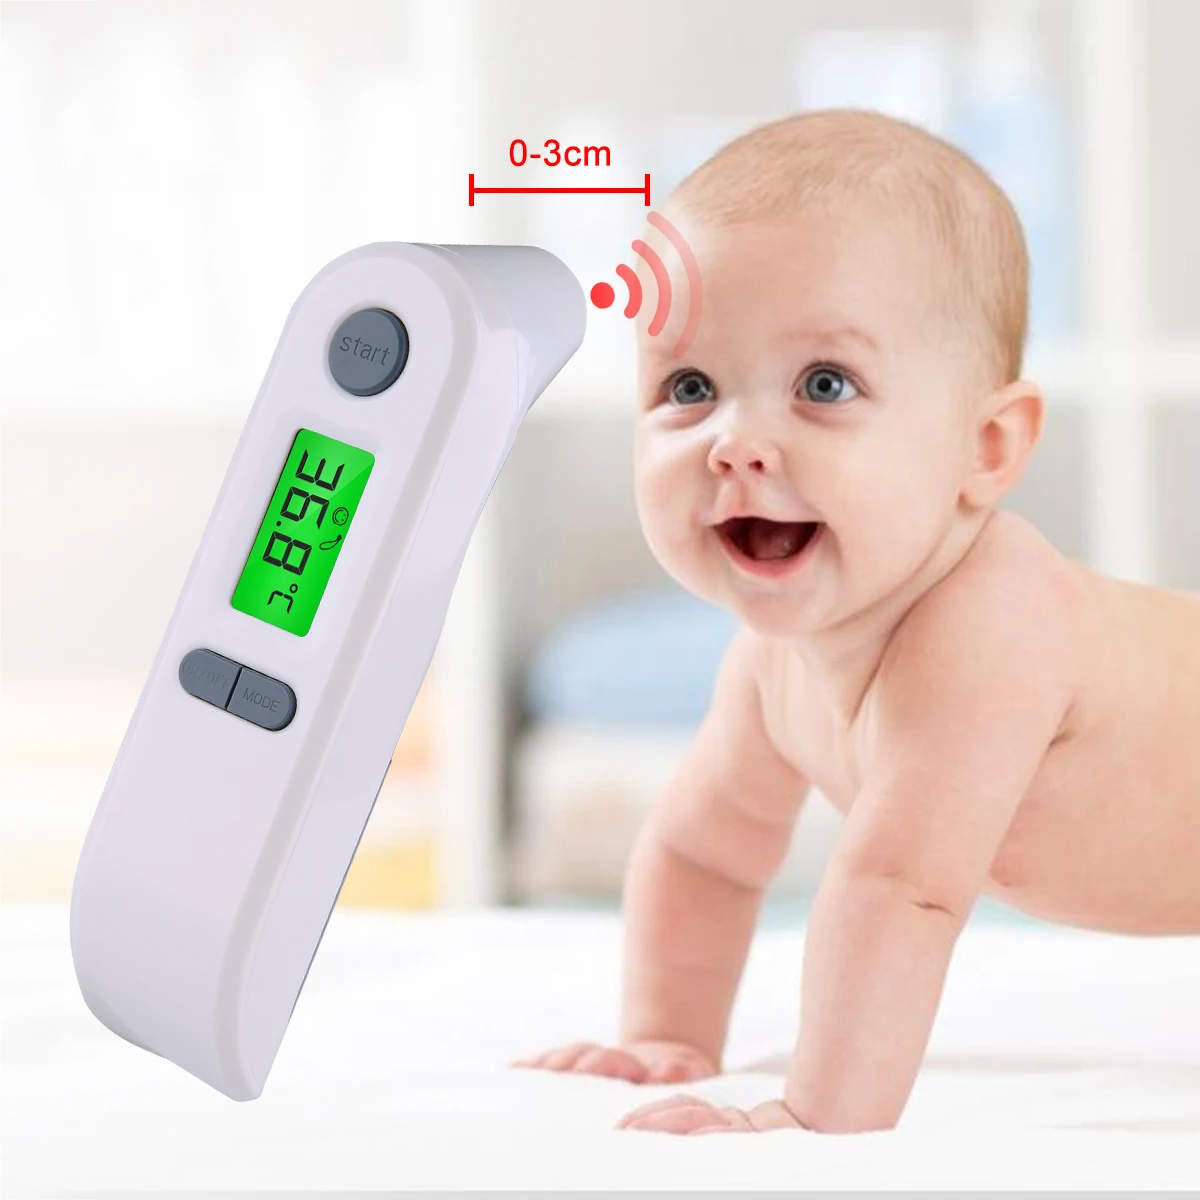 

Medical Infrared Thermometer Forehead Ears Baby Portable Non-contact child Handheld Body/Object Temperature Measure IR Device